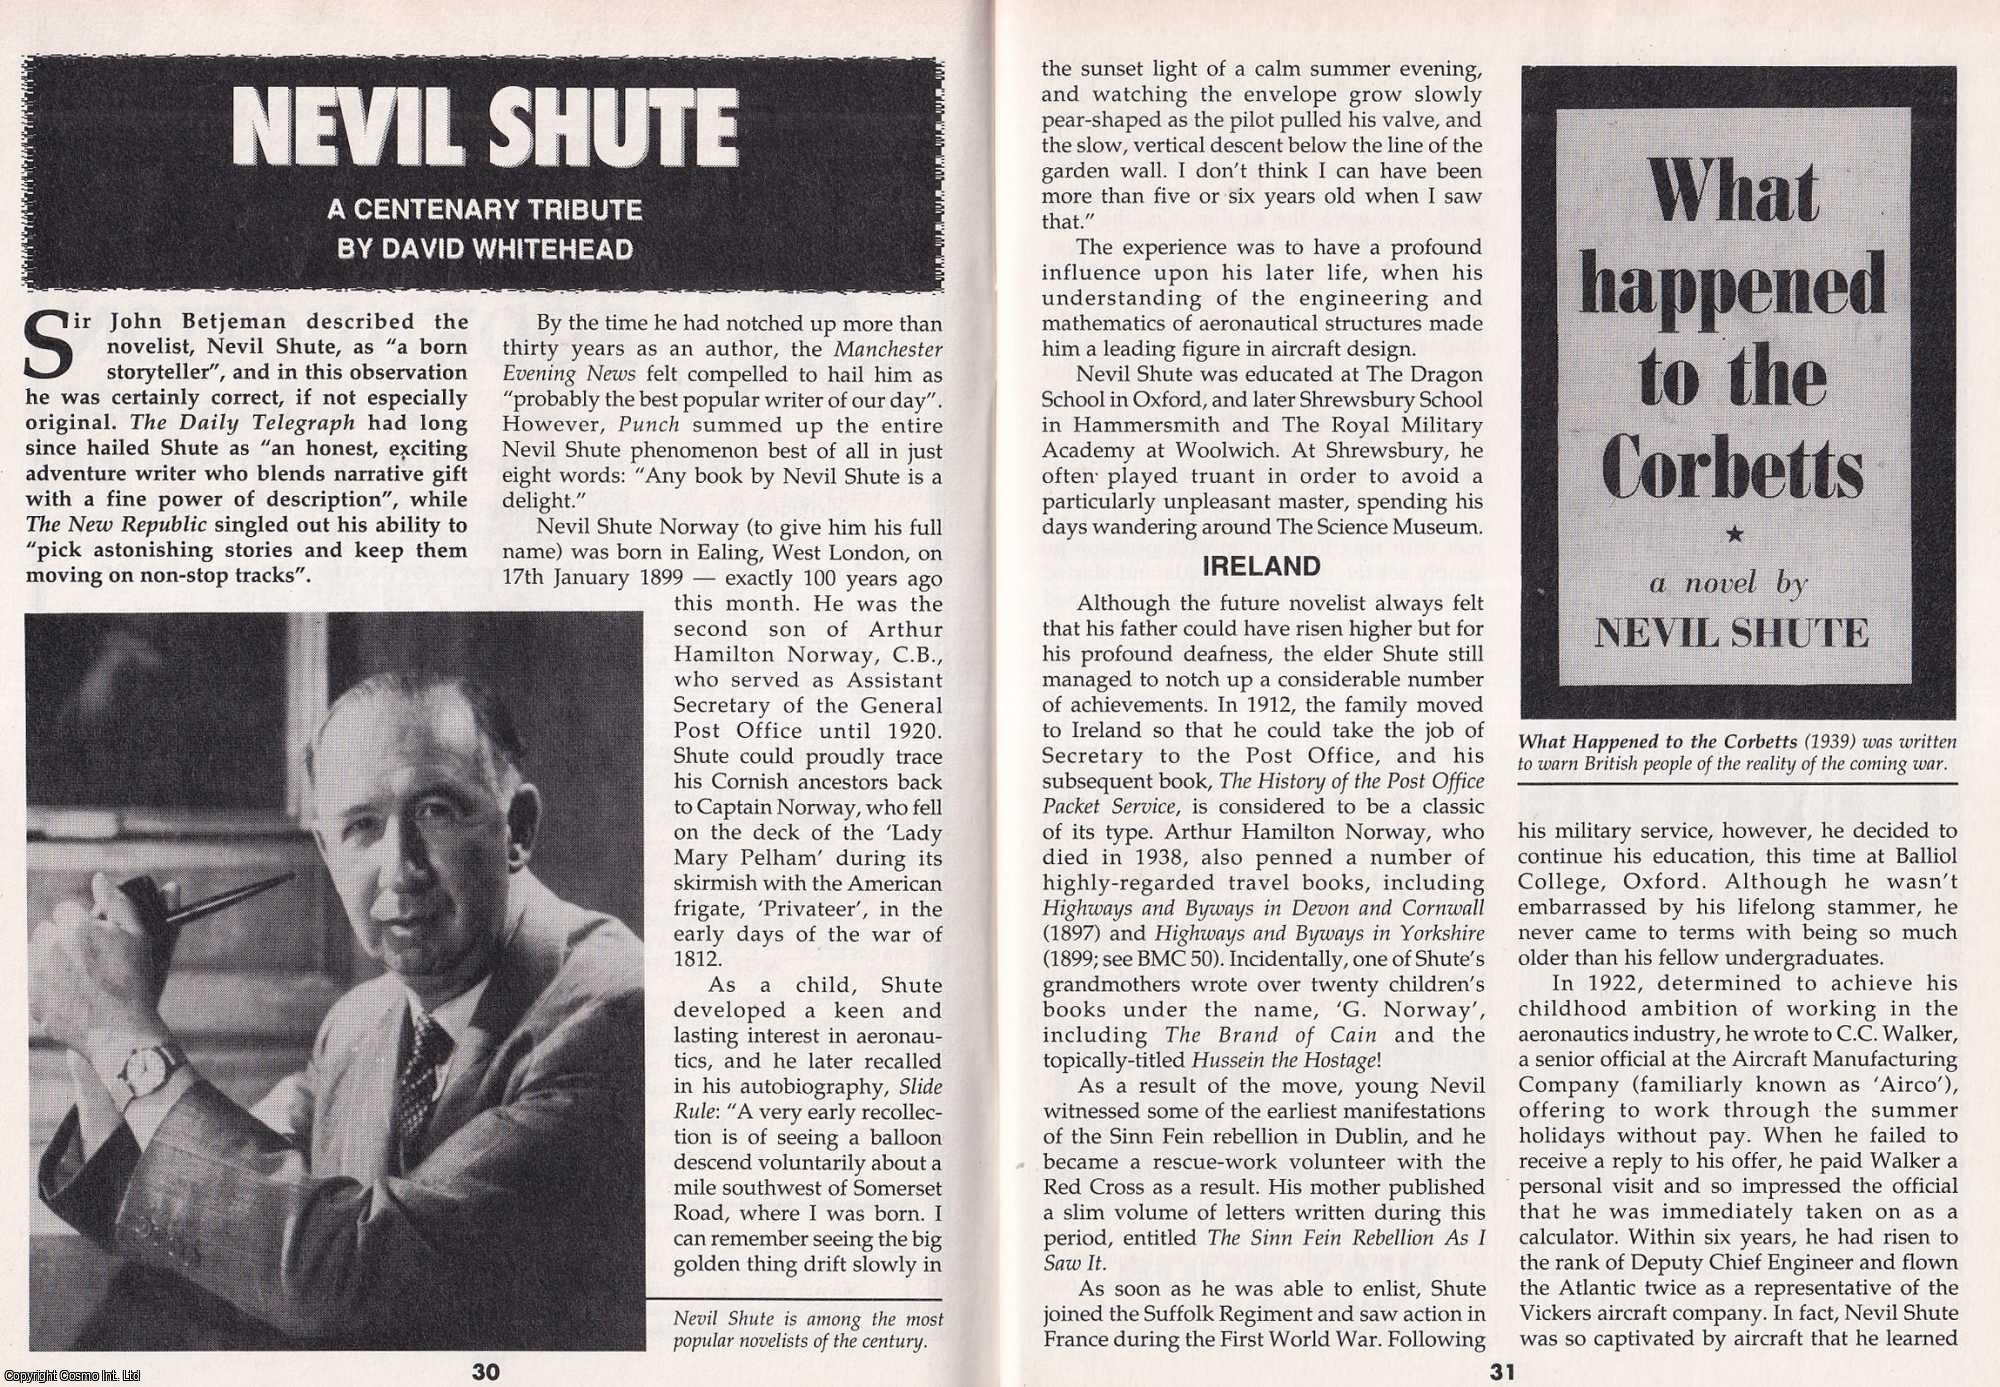 David Whitehead - Nevil Shute. A Centenary Tribute. This is an original article separated from an issue of The Book & Magazine Collector publication.